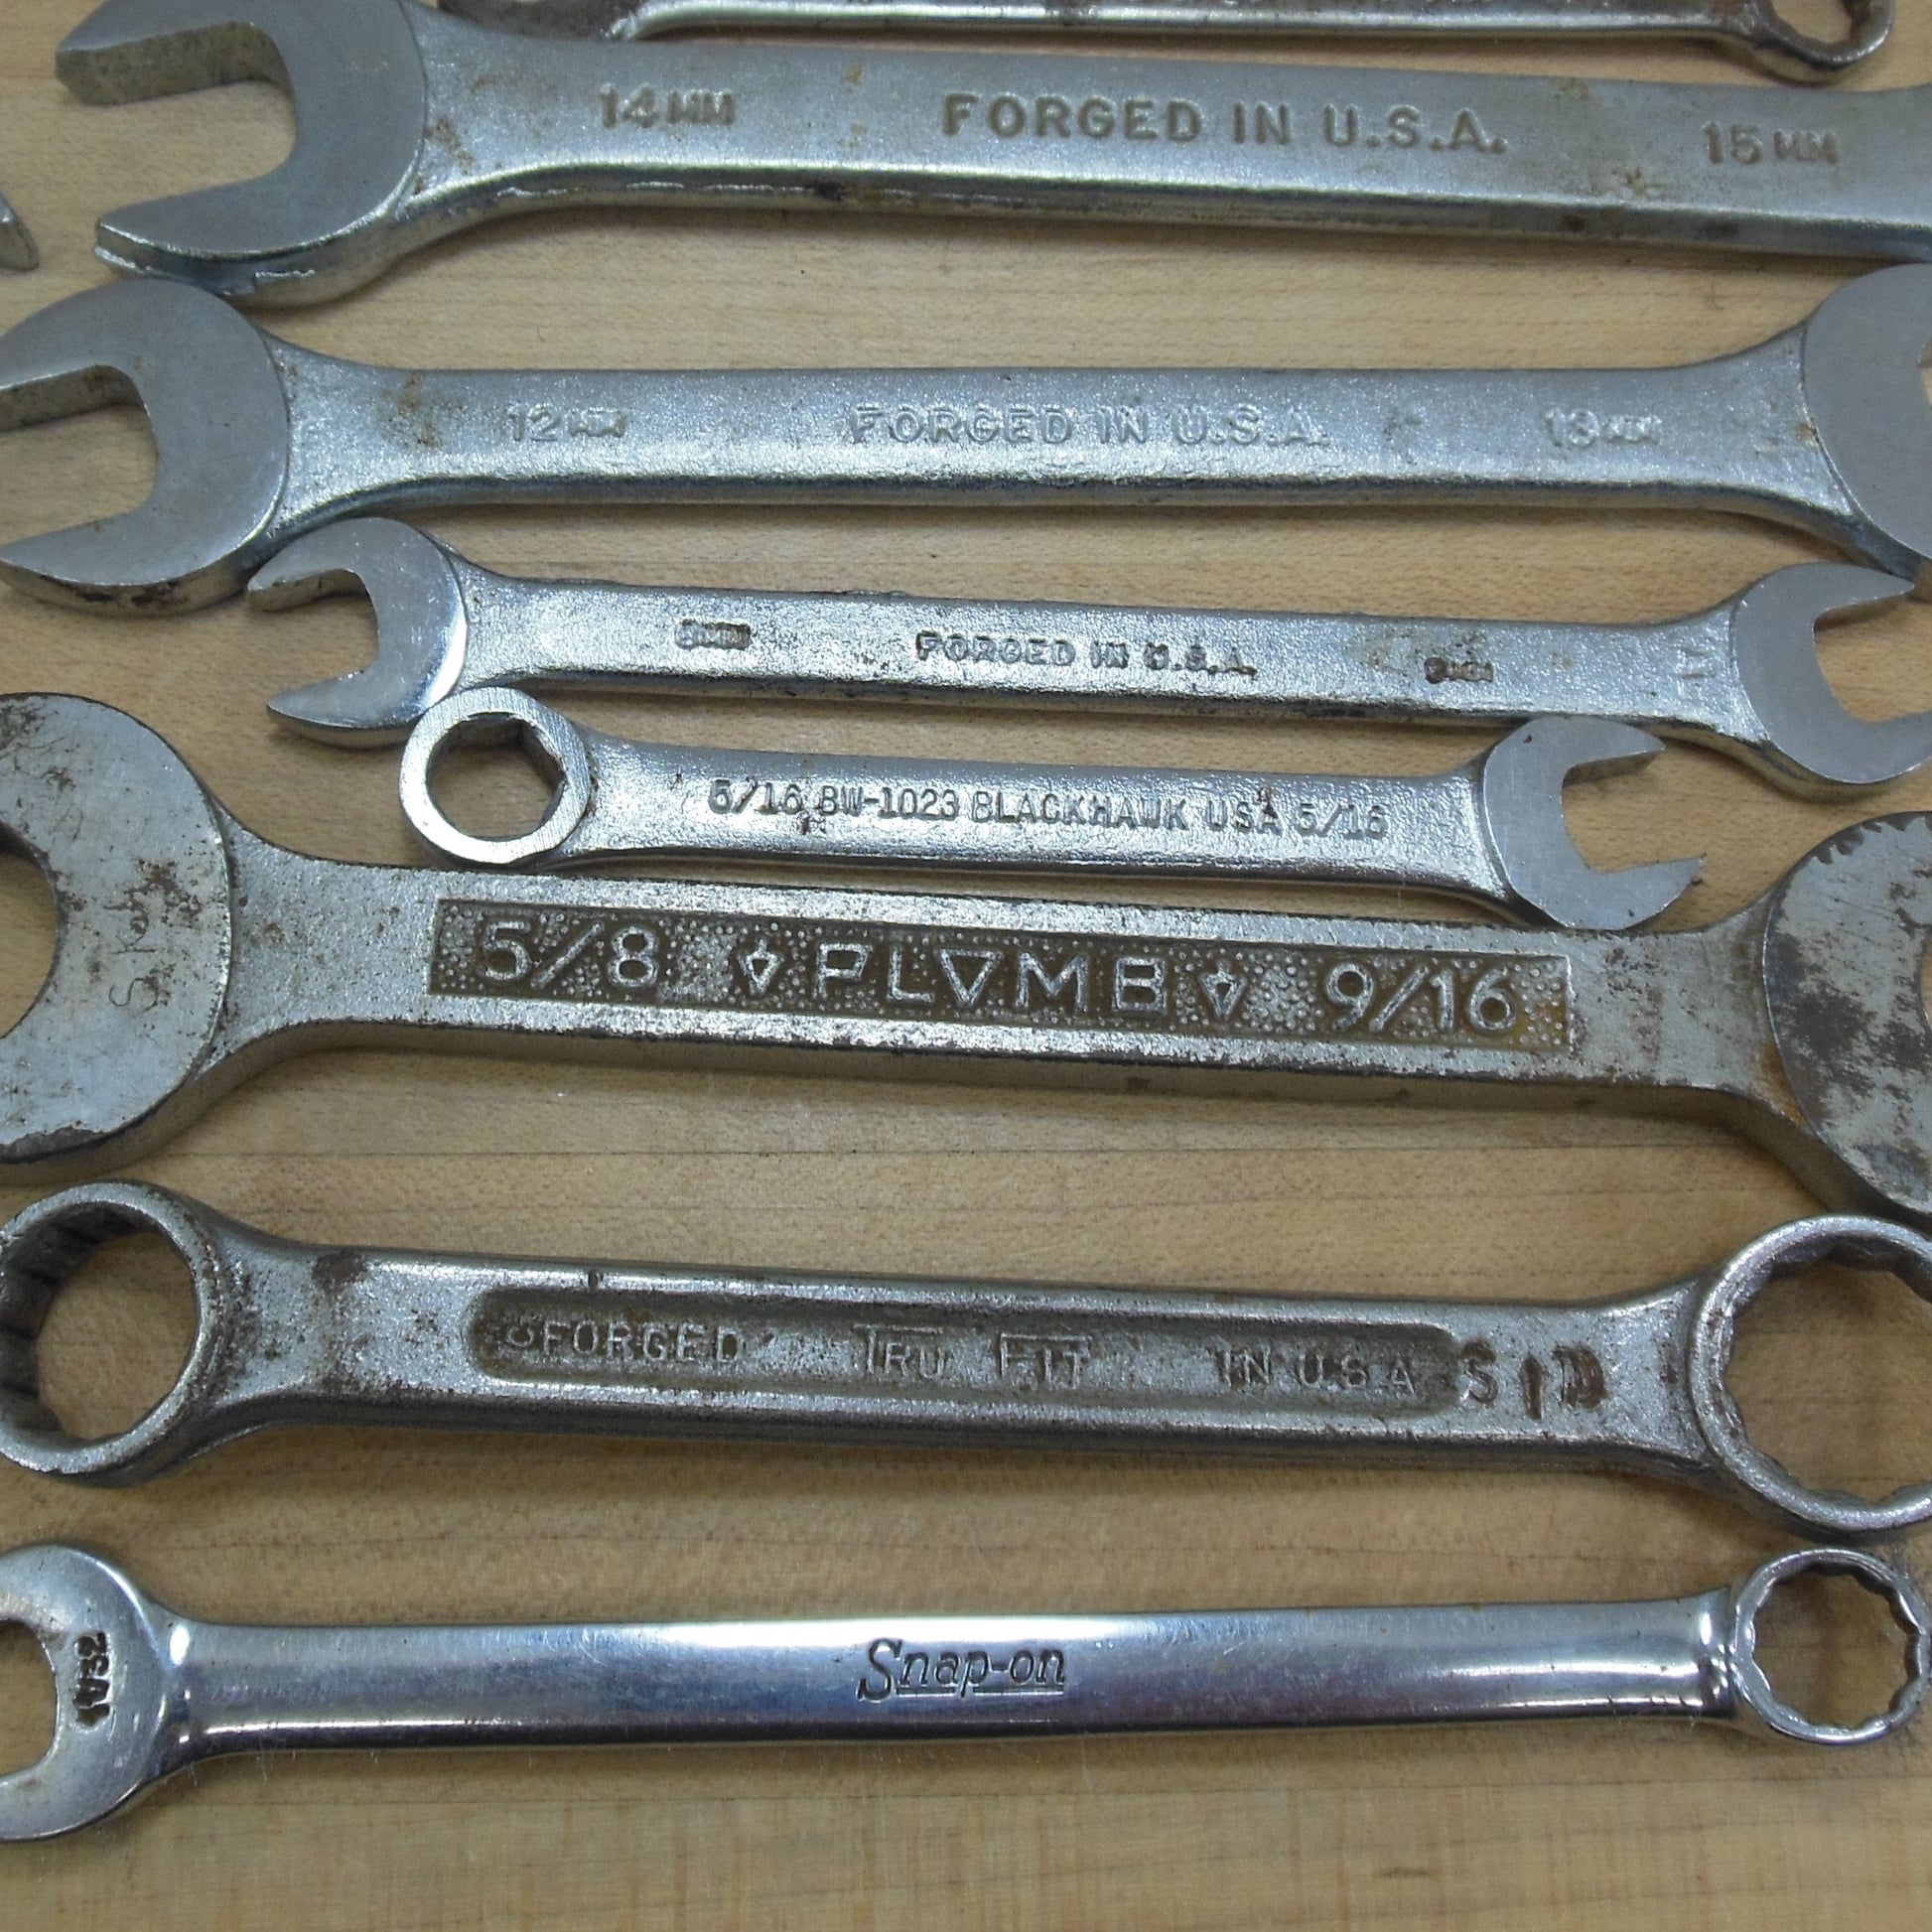 Mixed Maker 24 Lot Wrenches Open Combo Box - Craftsman Snap-on S-K Proto Challenger Etc. vintage